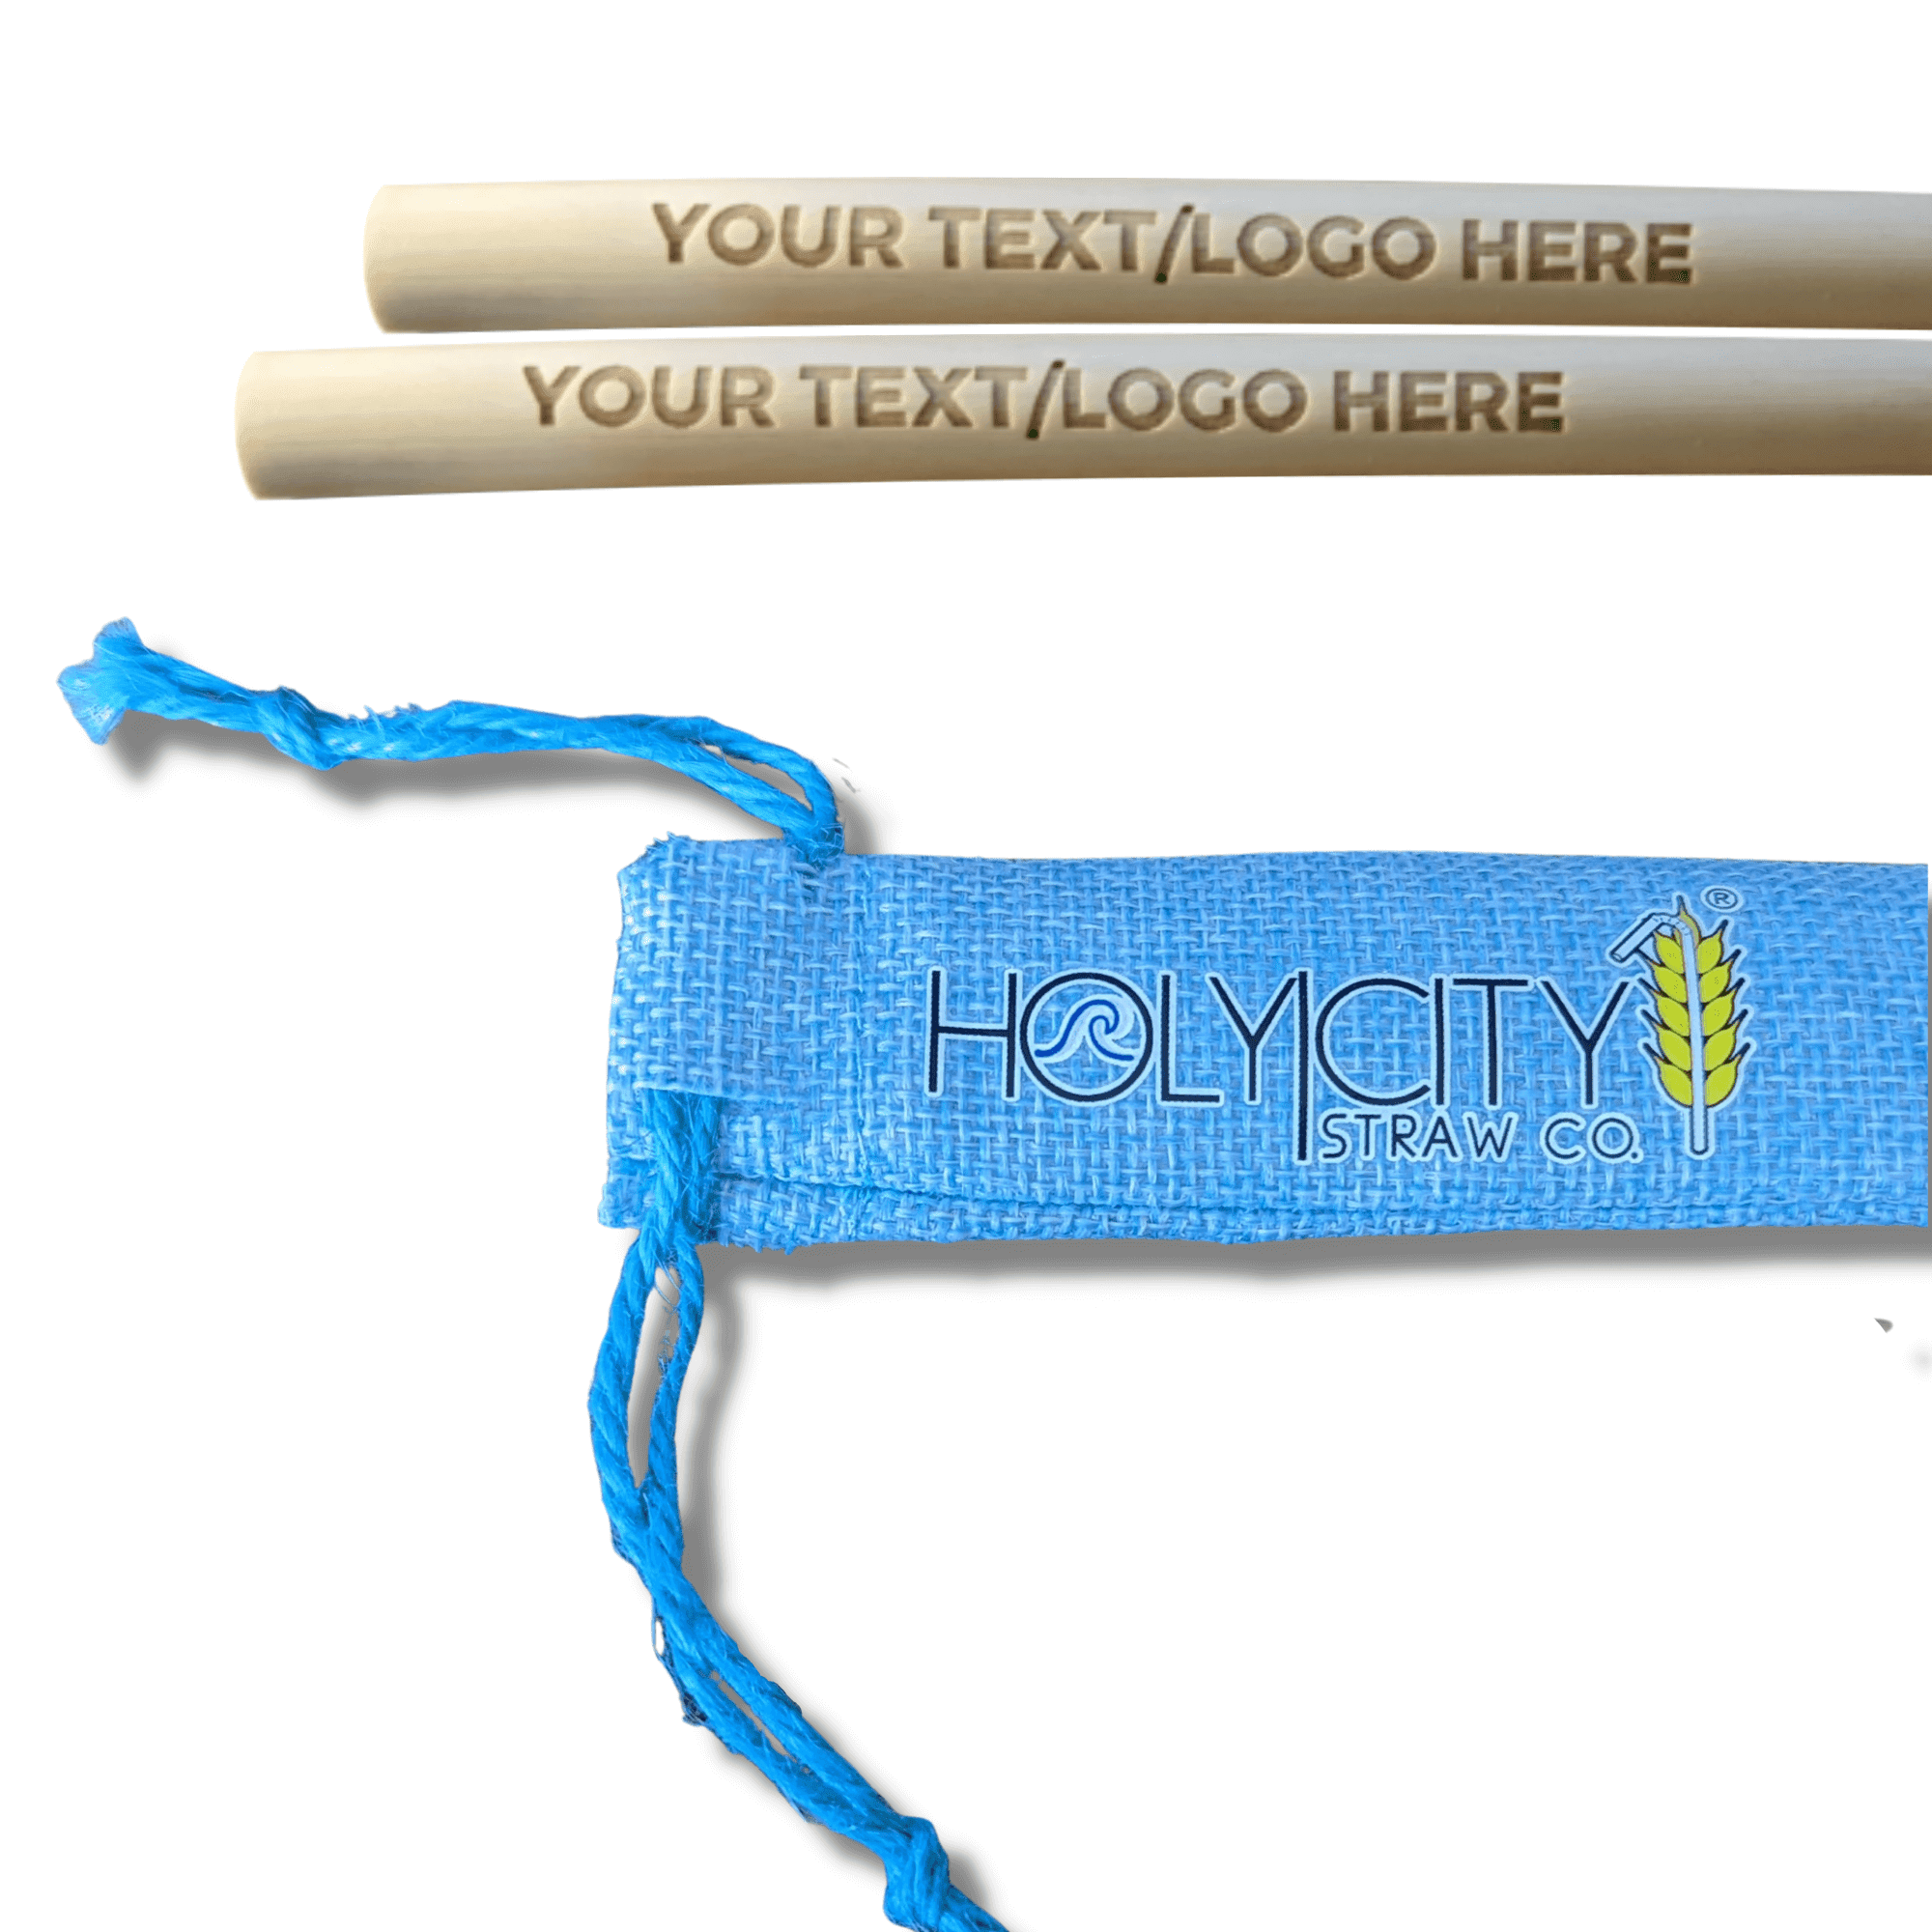 Customizable Two Straw/ Holy City Branded Jute Pouch Combo